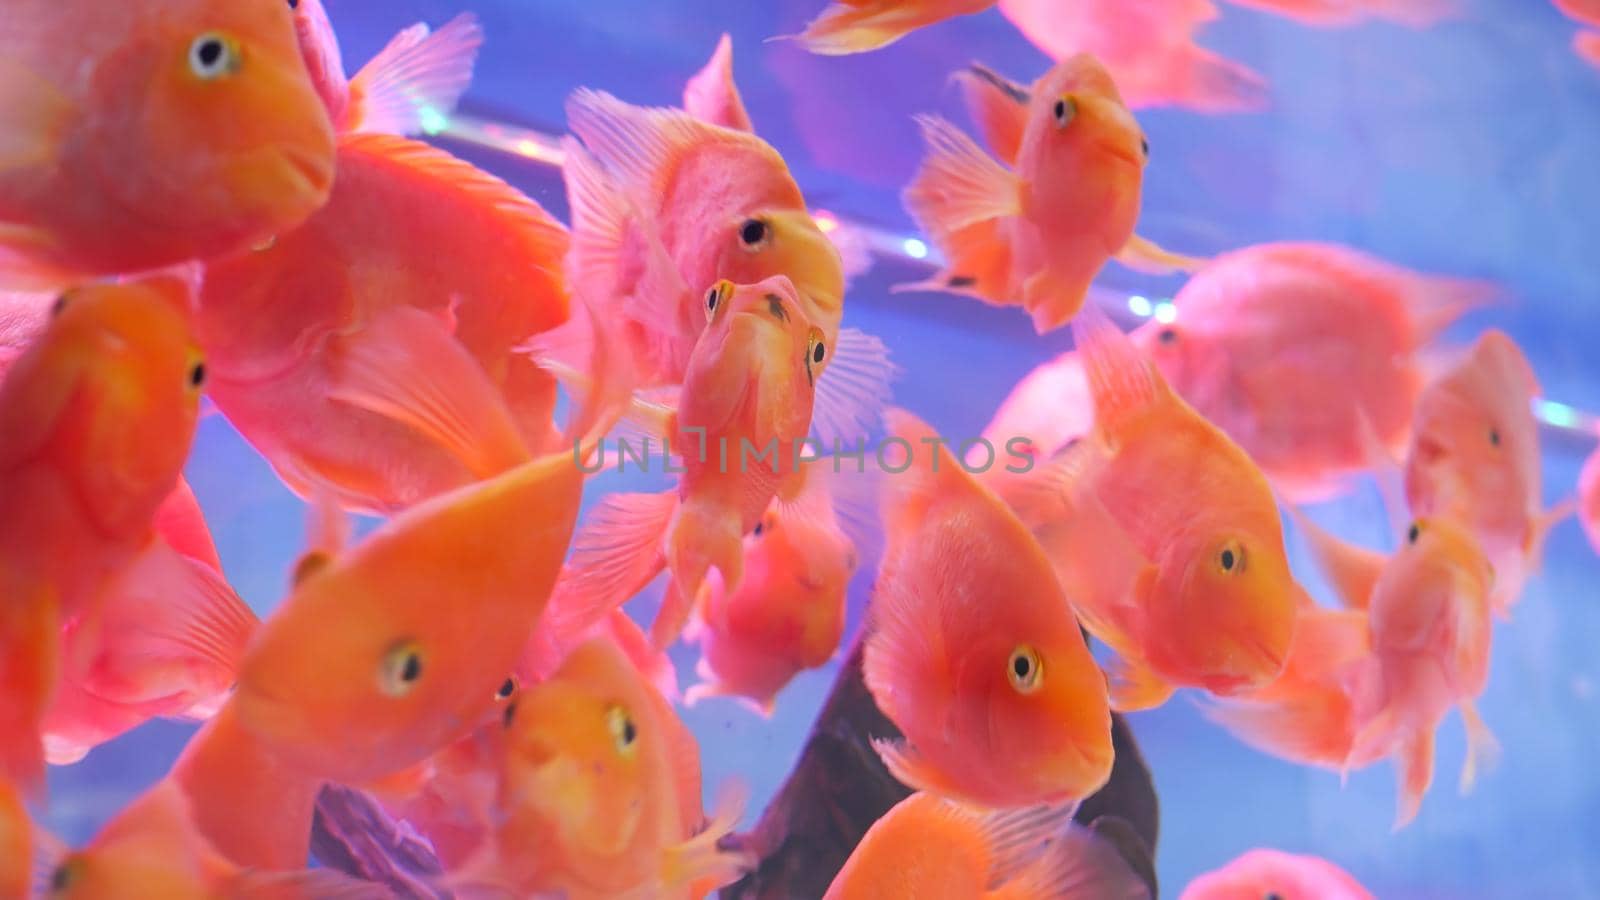 Diversity of tropical fishes in exotic decorative aquarium. Assortment in chatuchak fish market pet shops. Close up of colorful pets displayed on stall. Variety for sale on counter, trading on bazaar